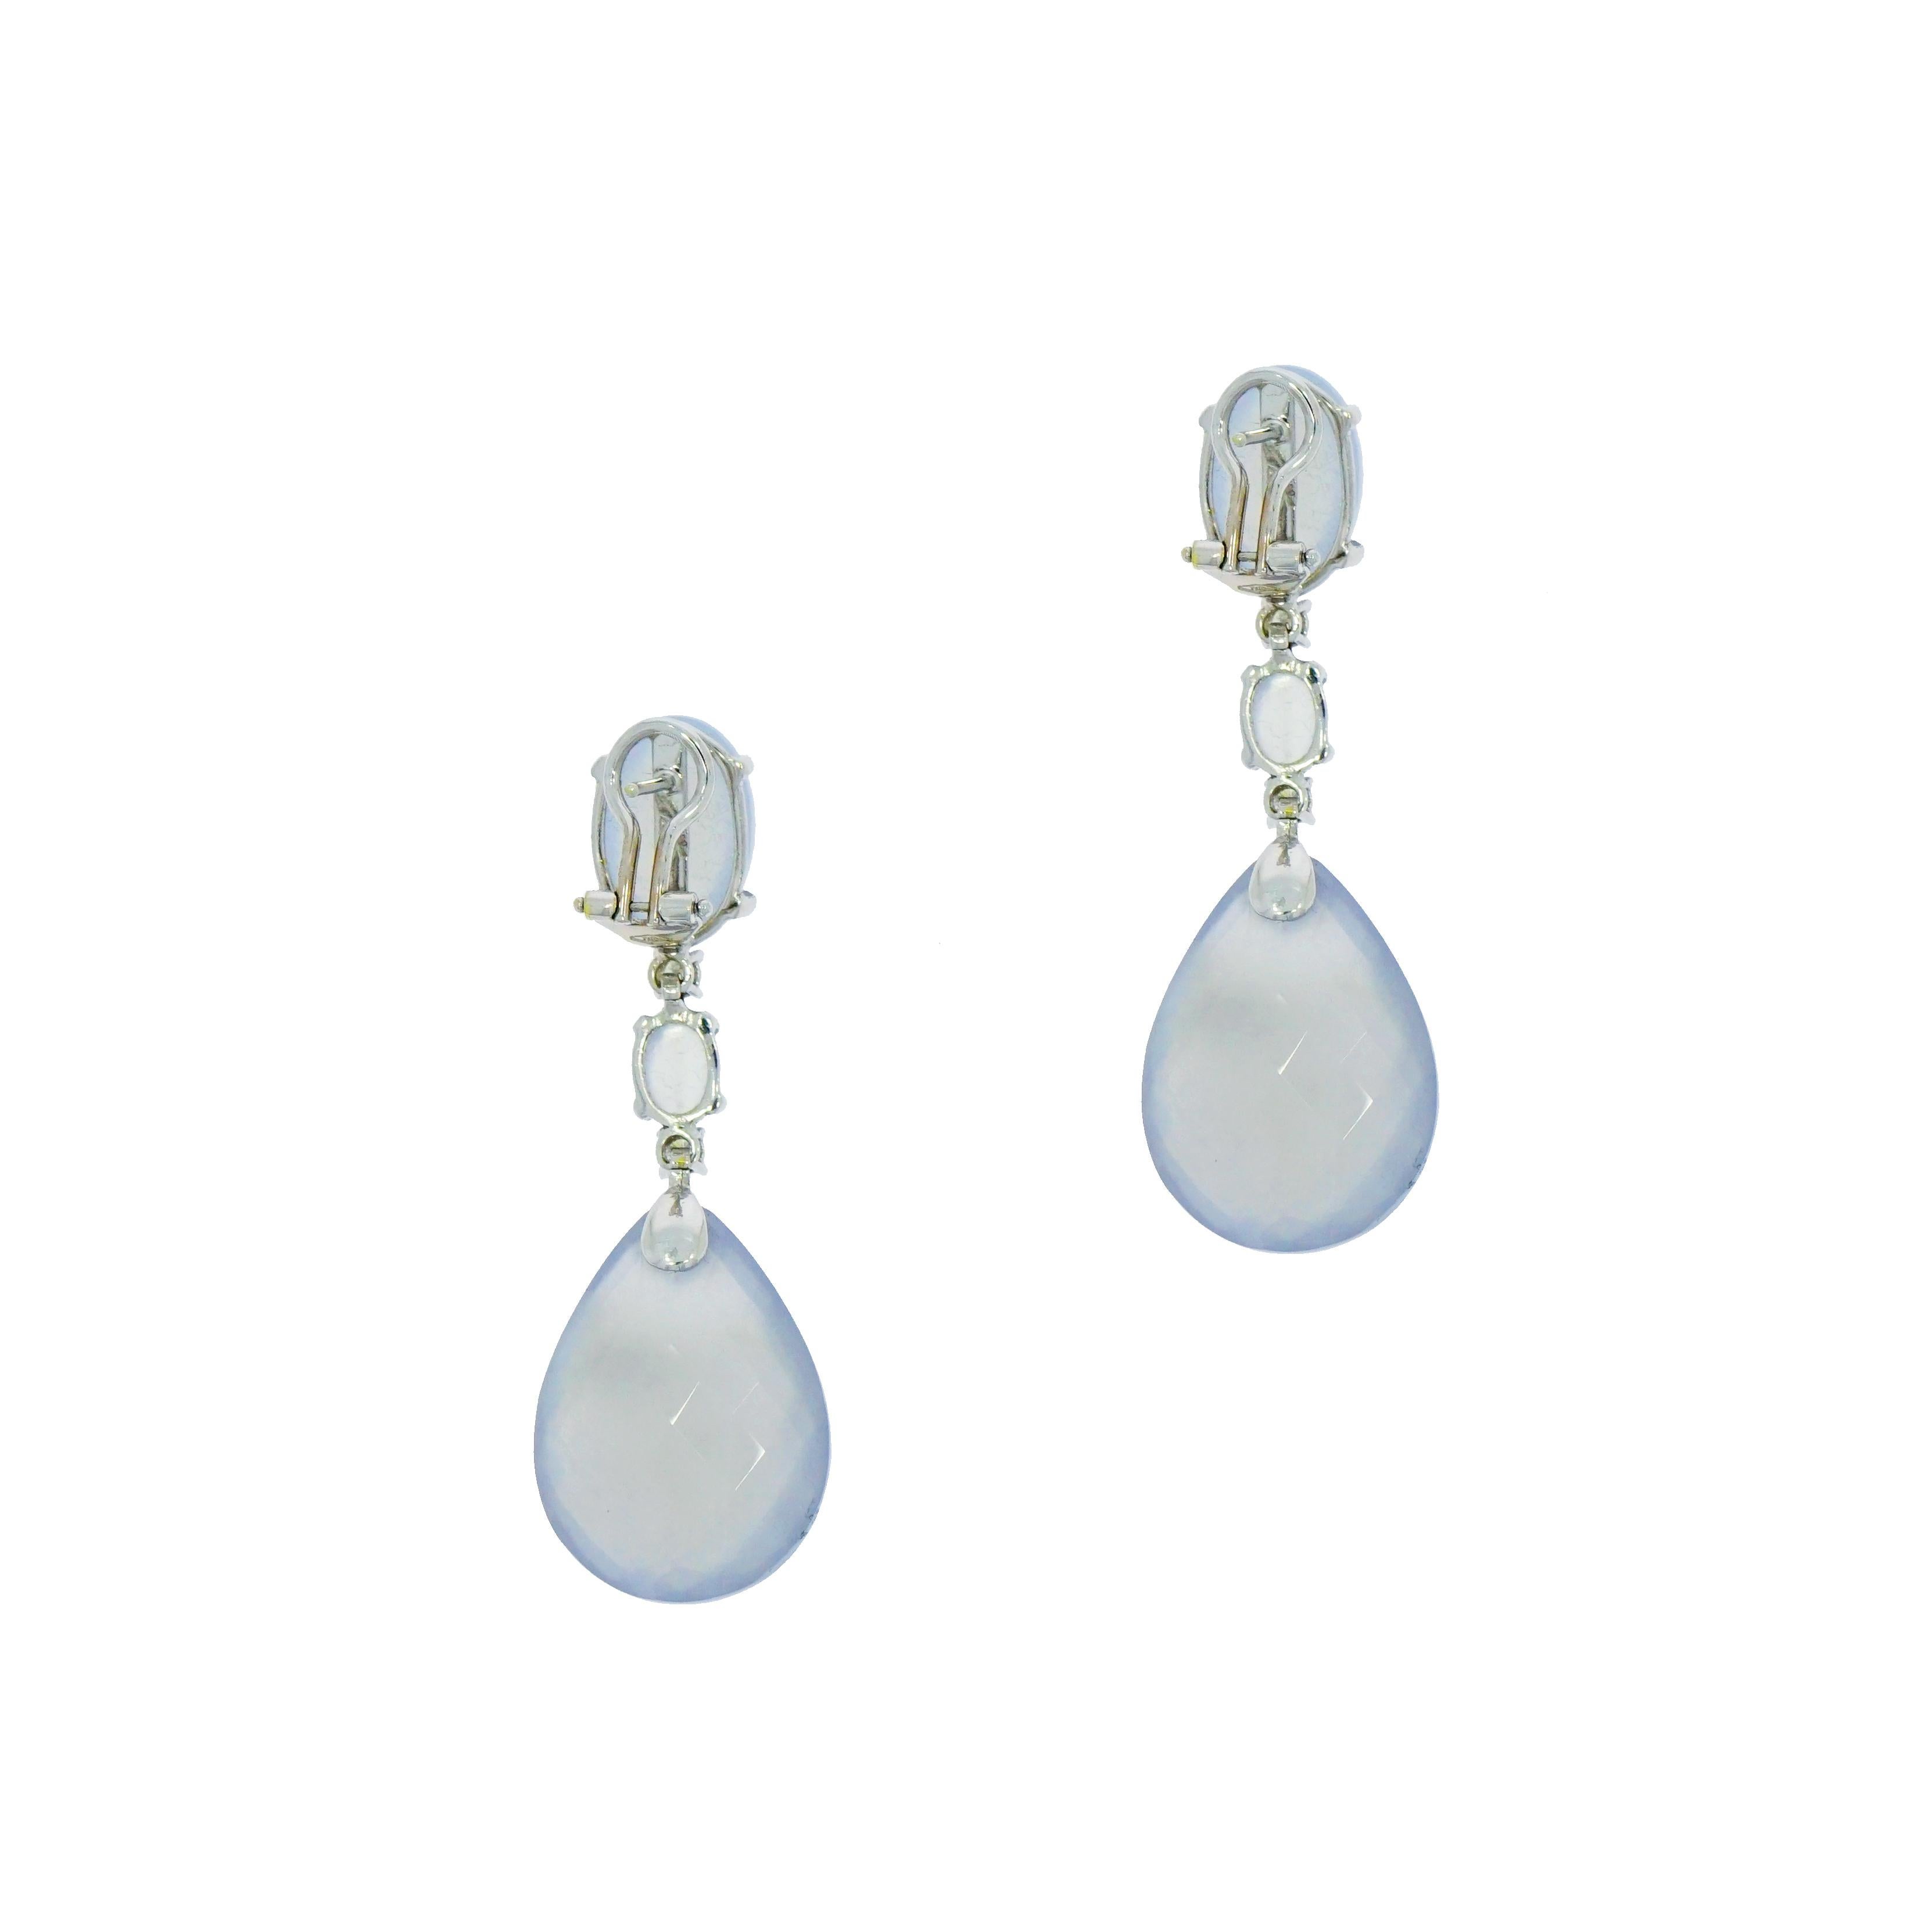 This pair of light blue grayish chalcedony drop earrings featuring a fun and unique stone, shape, and design. You won't find anything else like them! 
Faceted Pear Shaped Chalcedony accented with an oval shaped chalcedony and 0.40 carat total weight